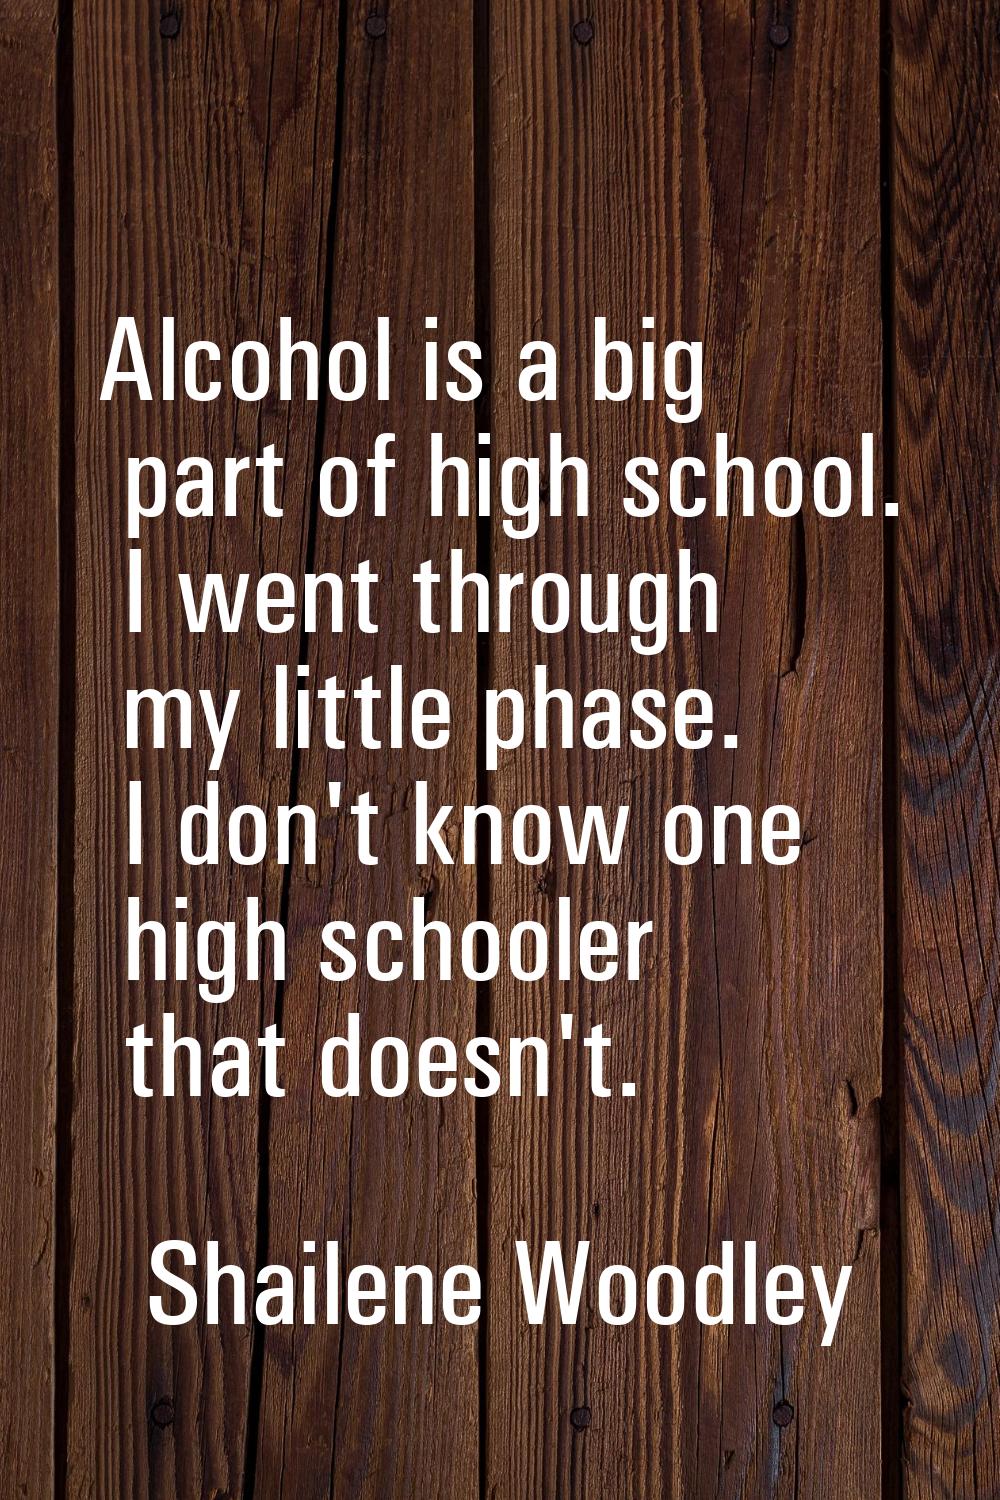 Alcohol is a big part of high school. I went through my little phase. I don't know one high schoole